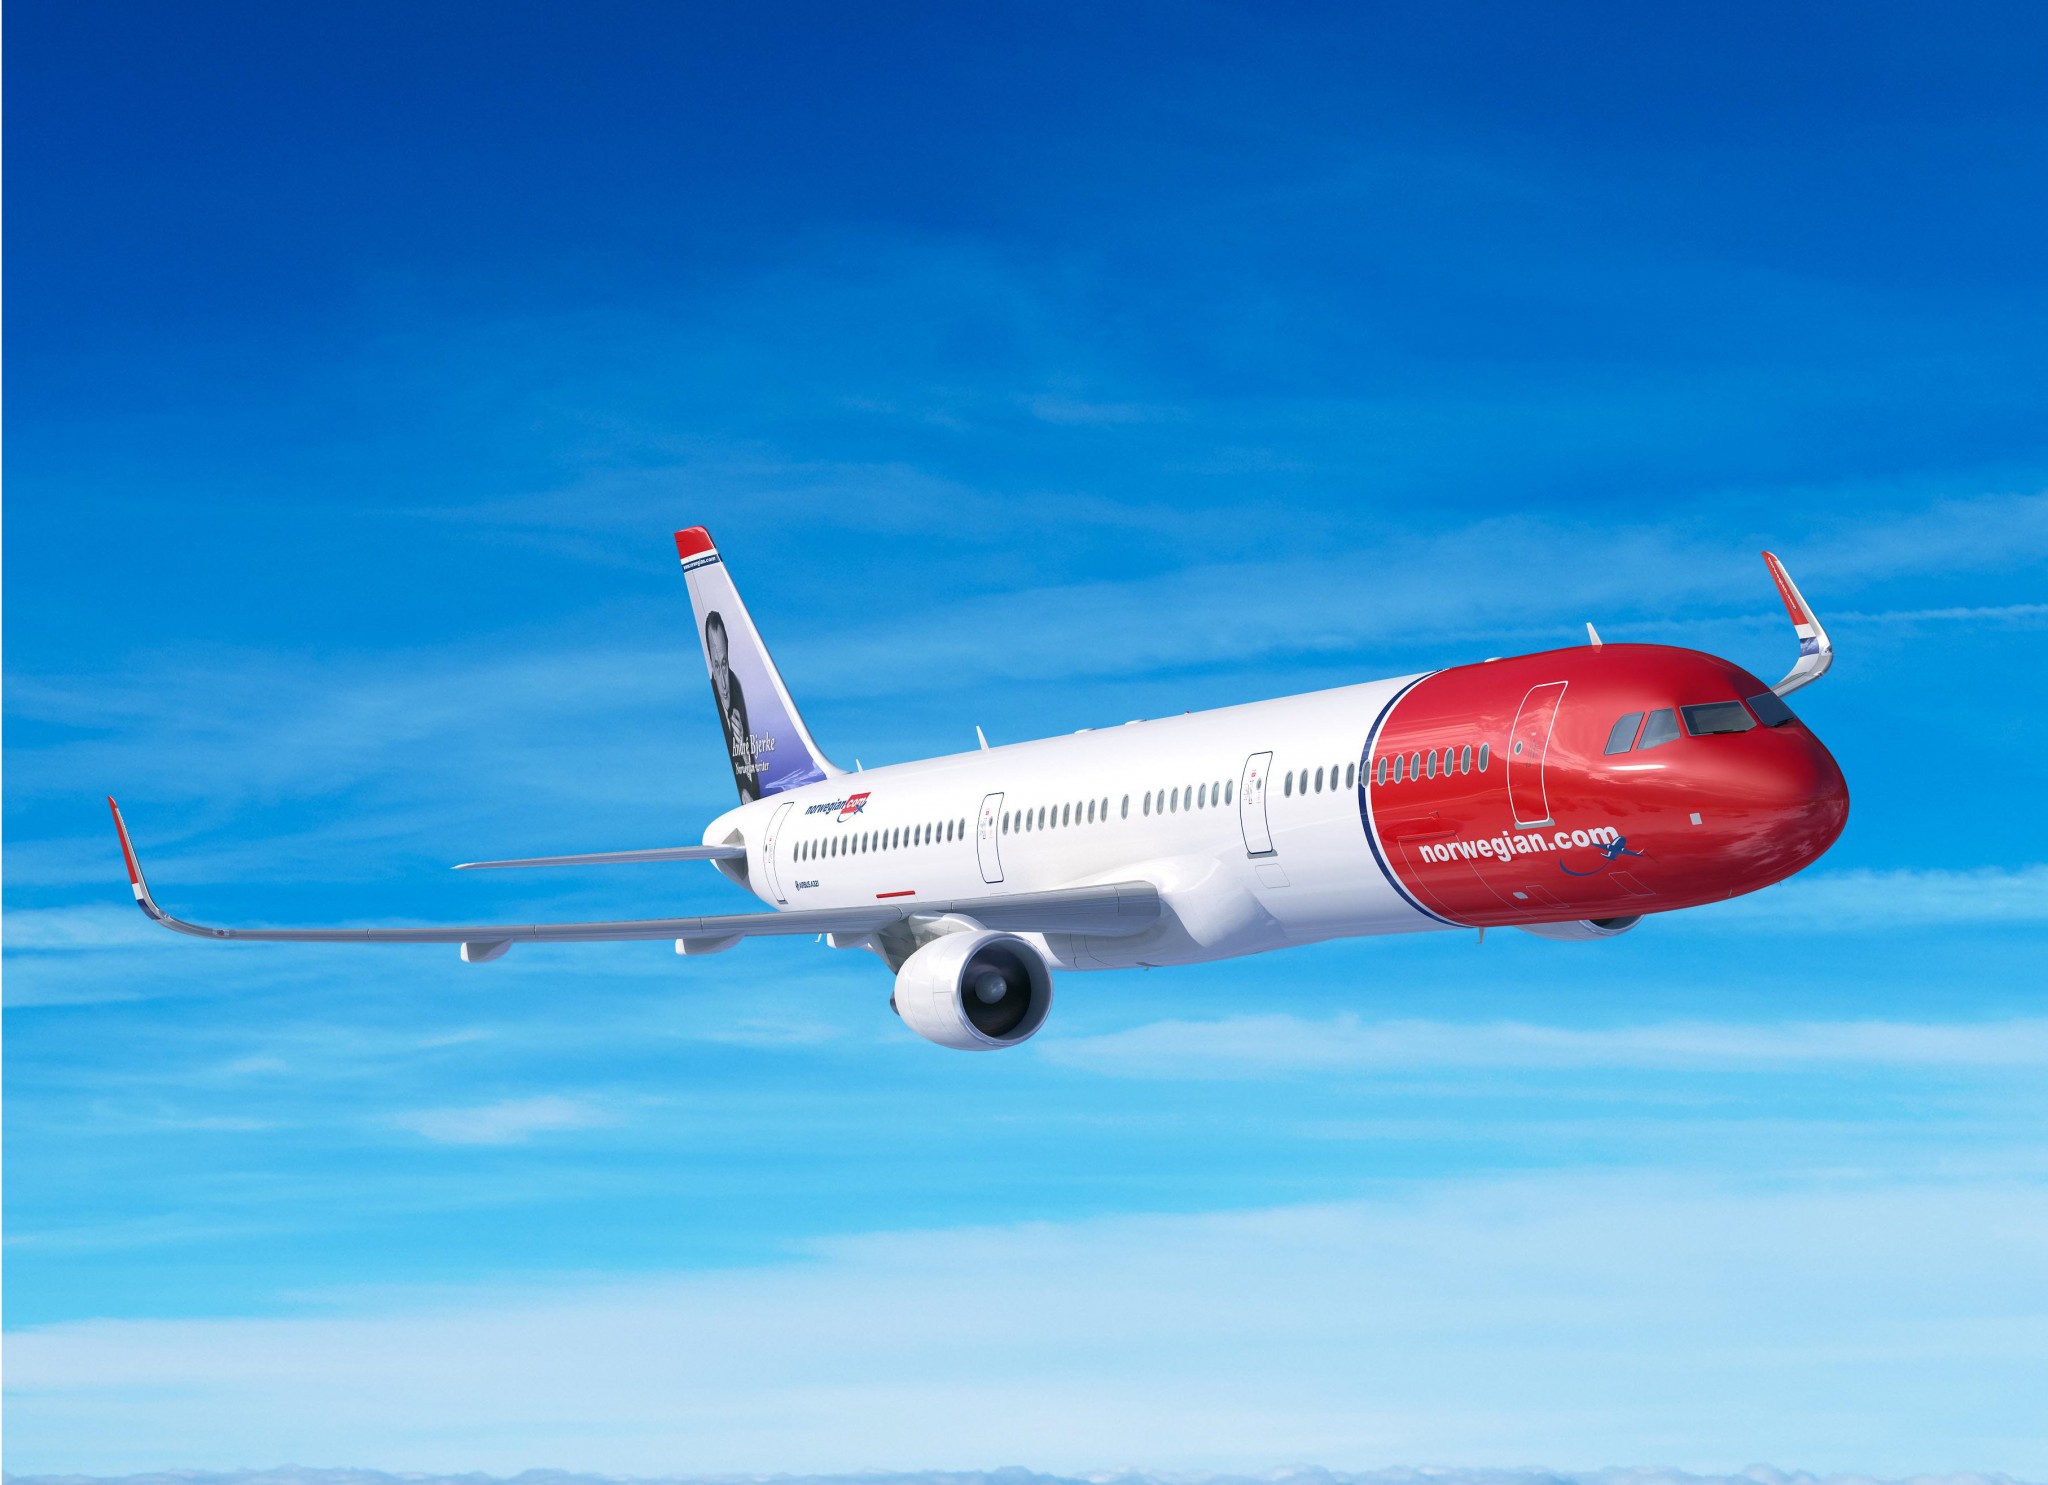 Norwegian reports best ever annual result with net profit of more than 1.1 billion NOK (£109million) in 2016